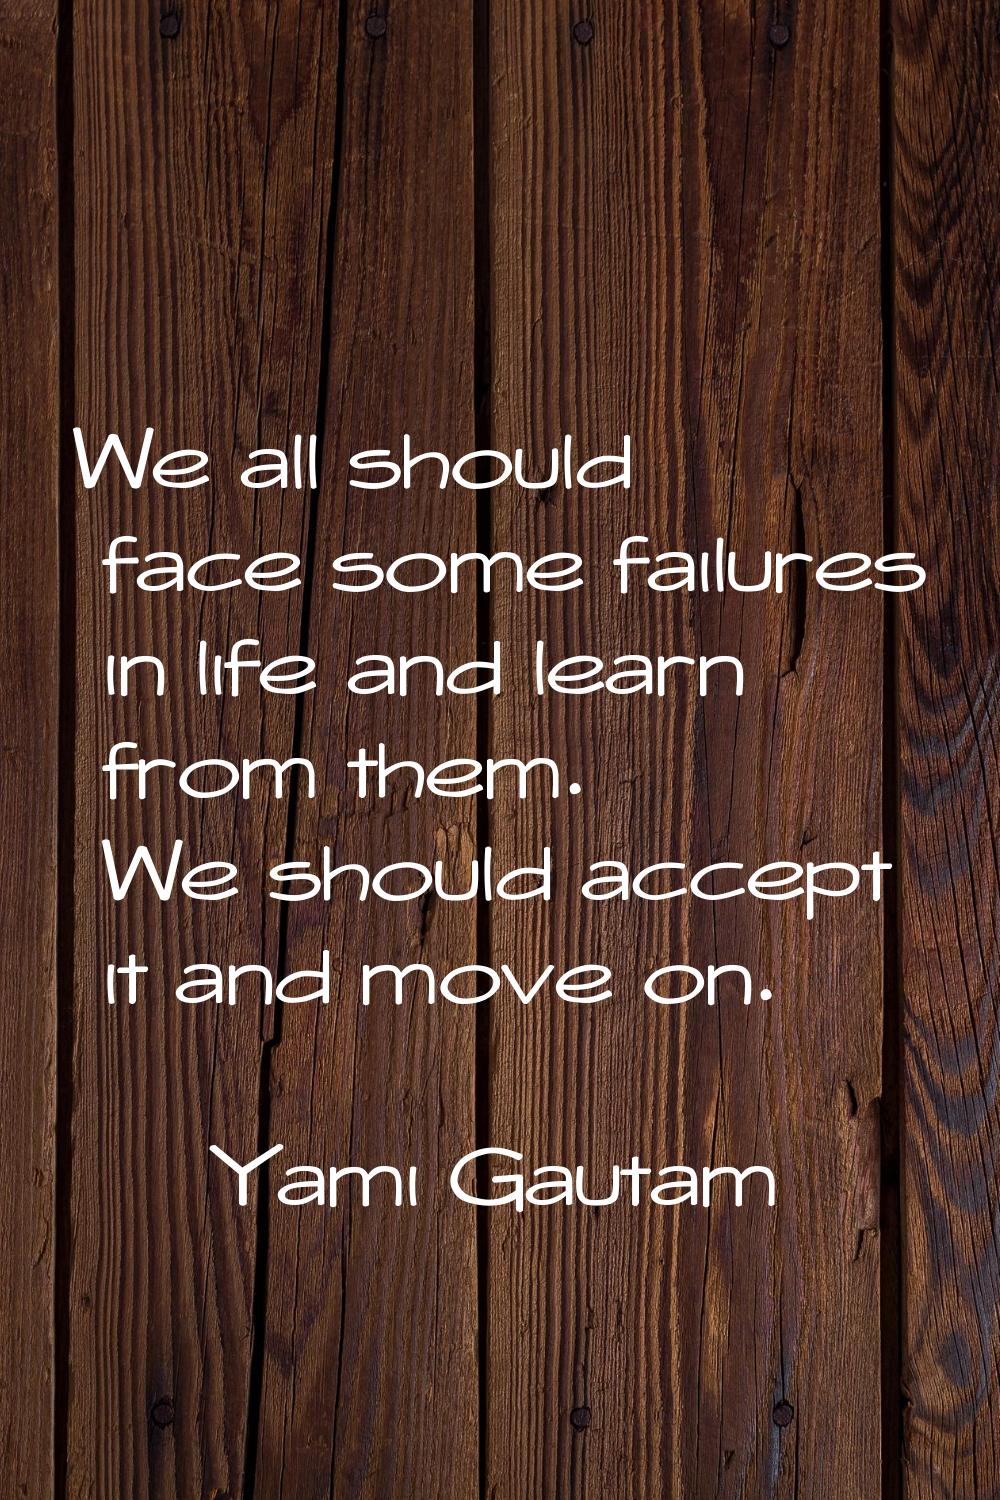 We all should face some failures in life and learn from them. We should accept it and move on.